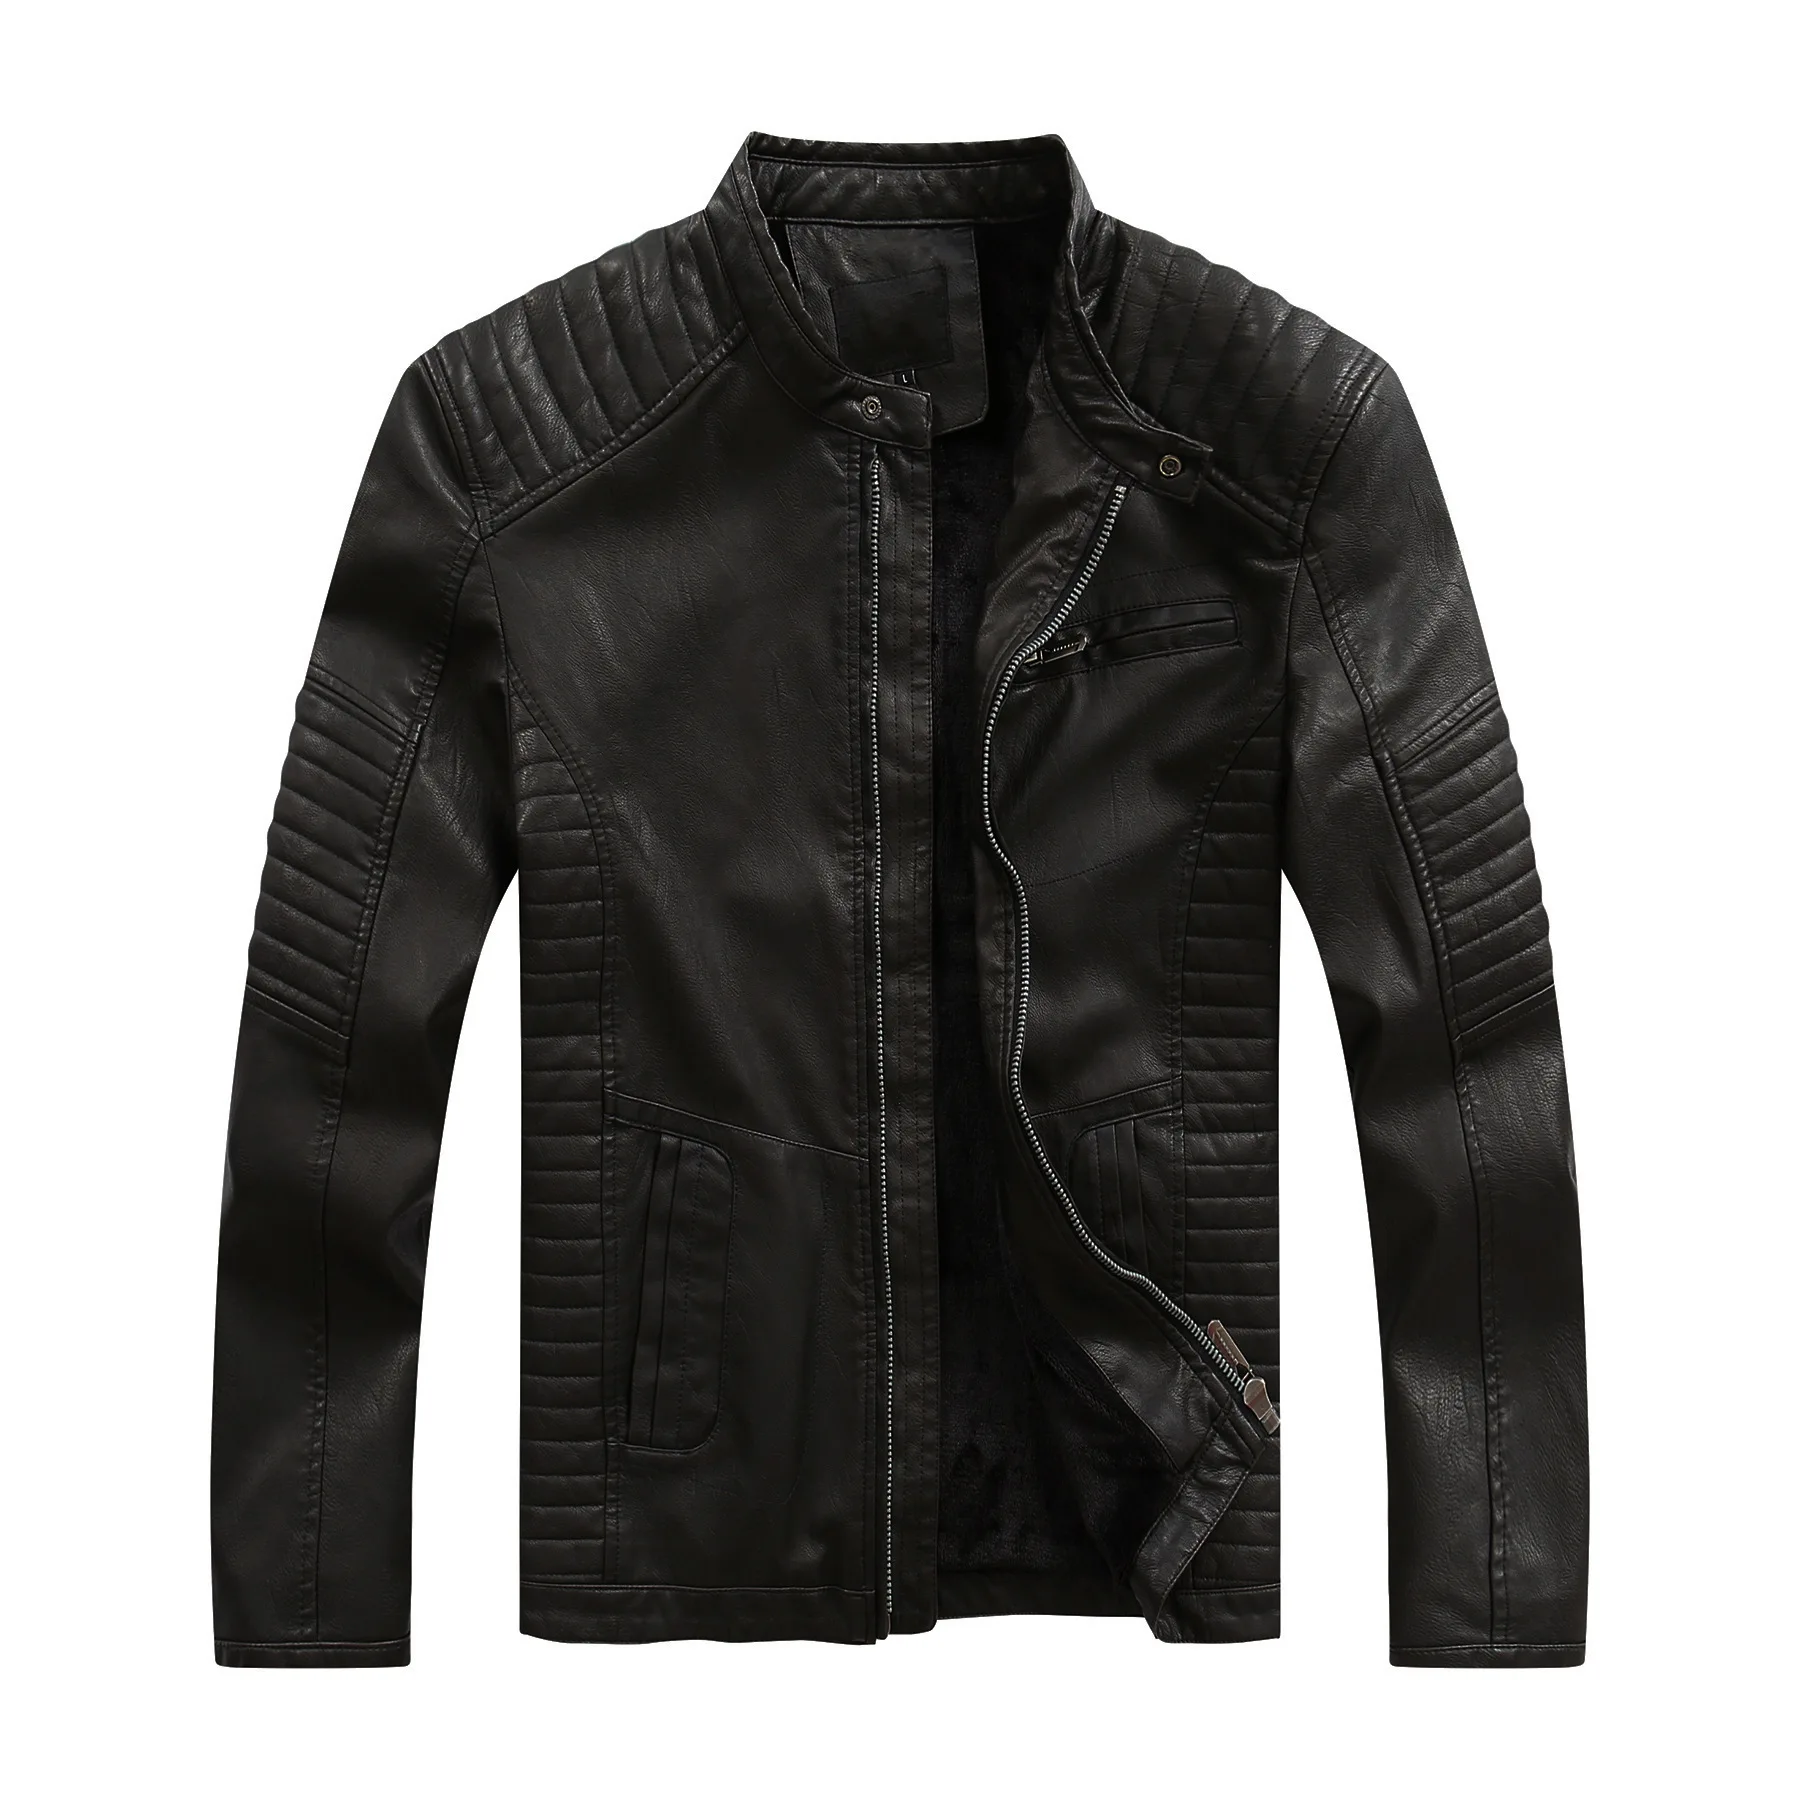 2021 autumn and winter new European and American fashion simple basic zipper men's brand motorcycle leather jacket